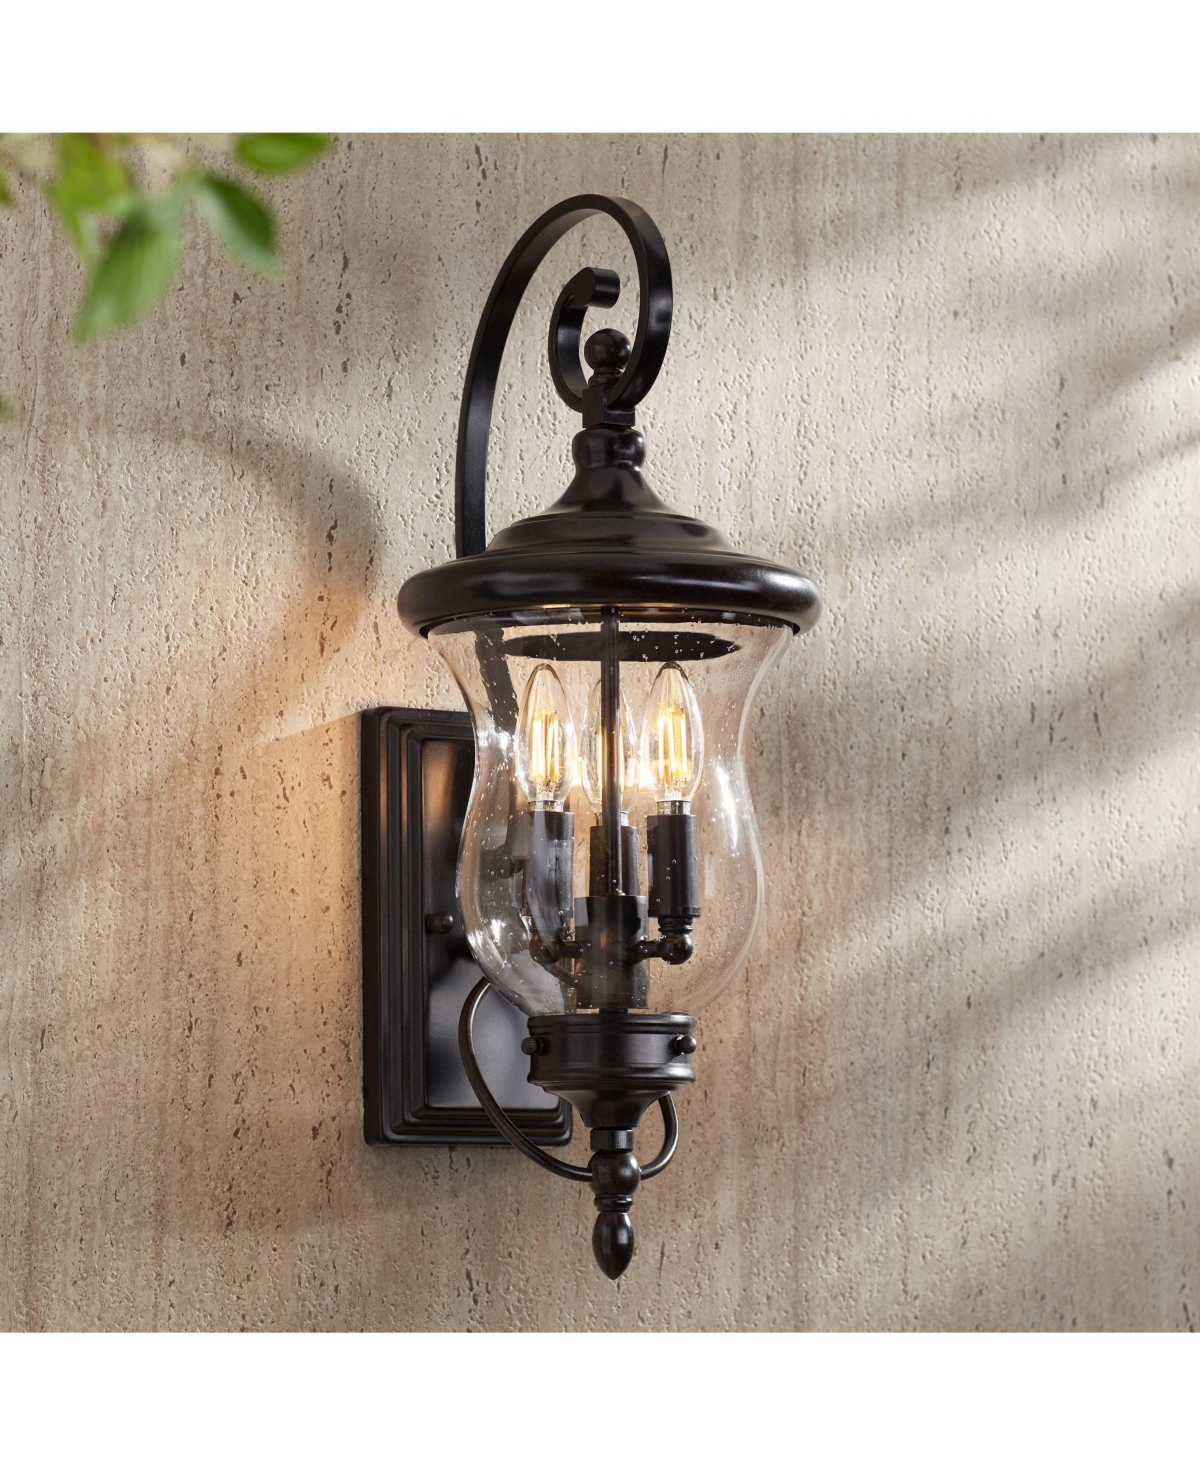 Carriage Traditional Outdoor Wall Light Fixture Led Bronze Brown 22" Clear Seedy Glass Shade Decor Exterior House Porch Patio Outside Deck Garage Yard